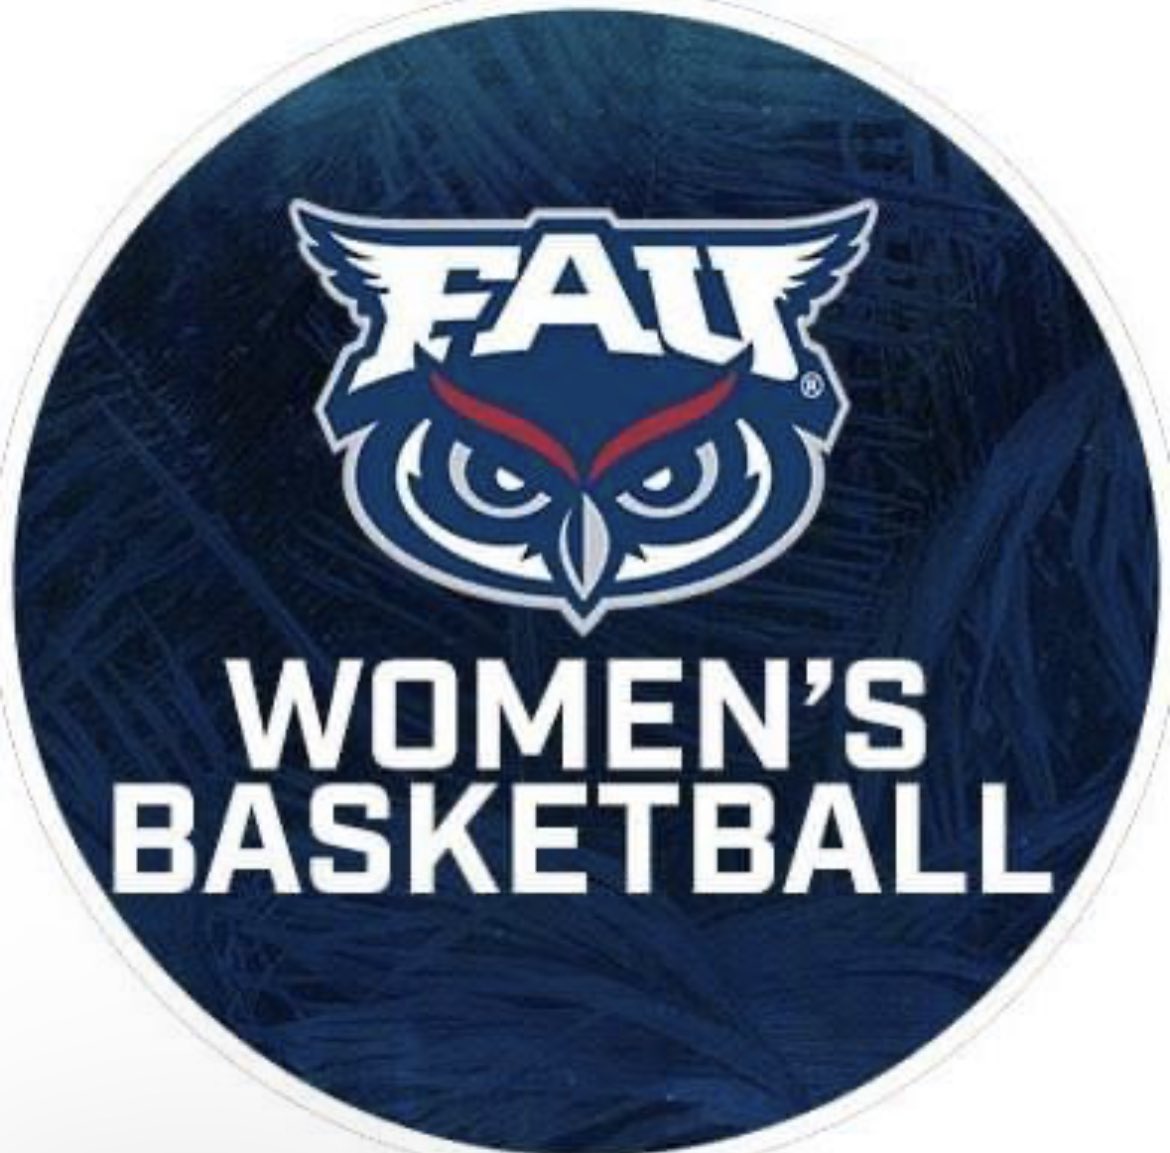 Had a great phone conversation with @coachsully10 and I am super excited to receive an offer from @FAUWBB! @LHSGbb @coach_jgray @teamhunchobball